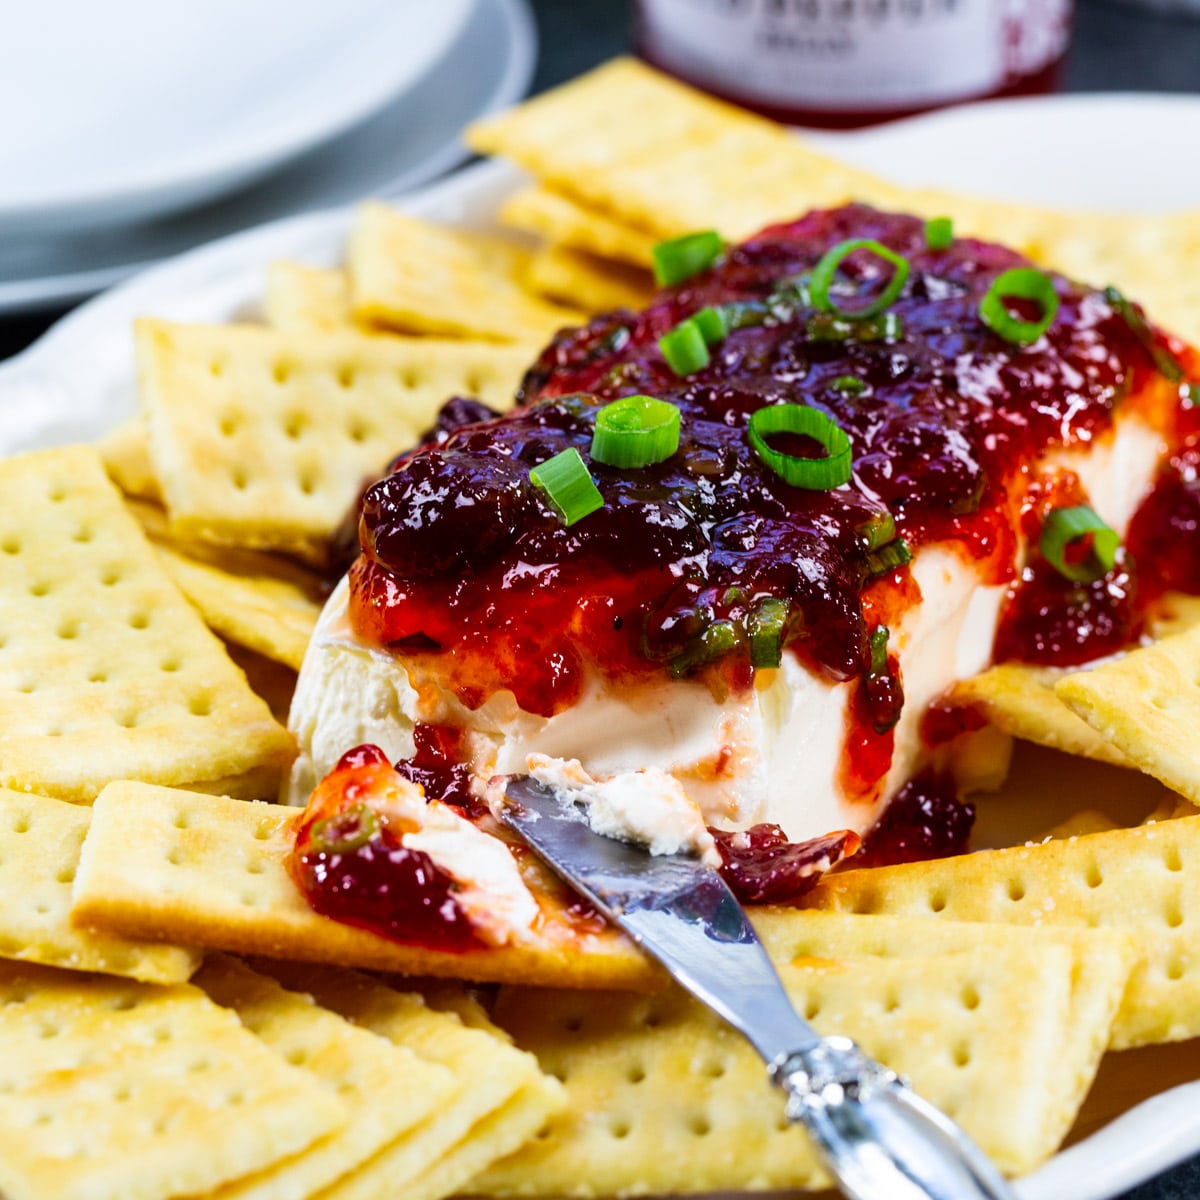 Cranberry Pepper Jelly Spread on a plate with Club crackers.